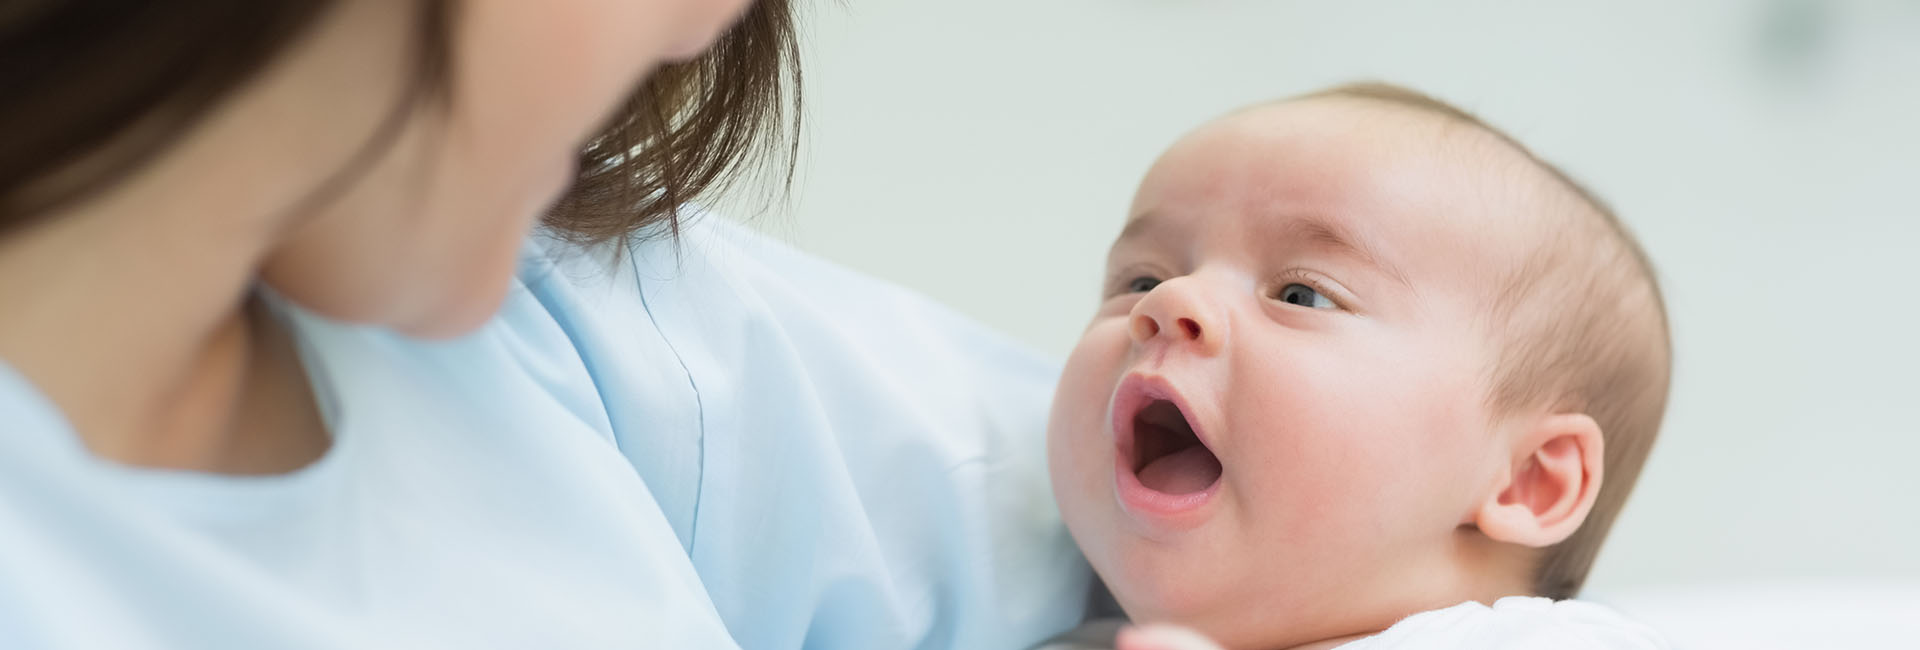 Behind the “screen”: Champions for newborn hearing health